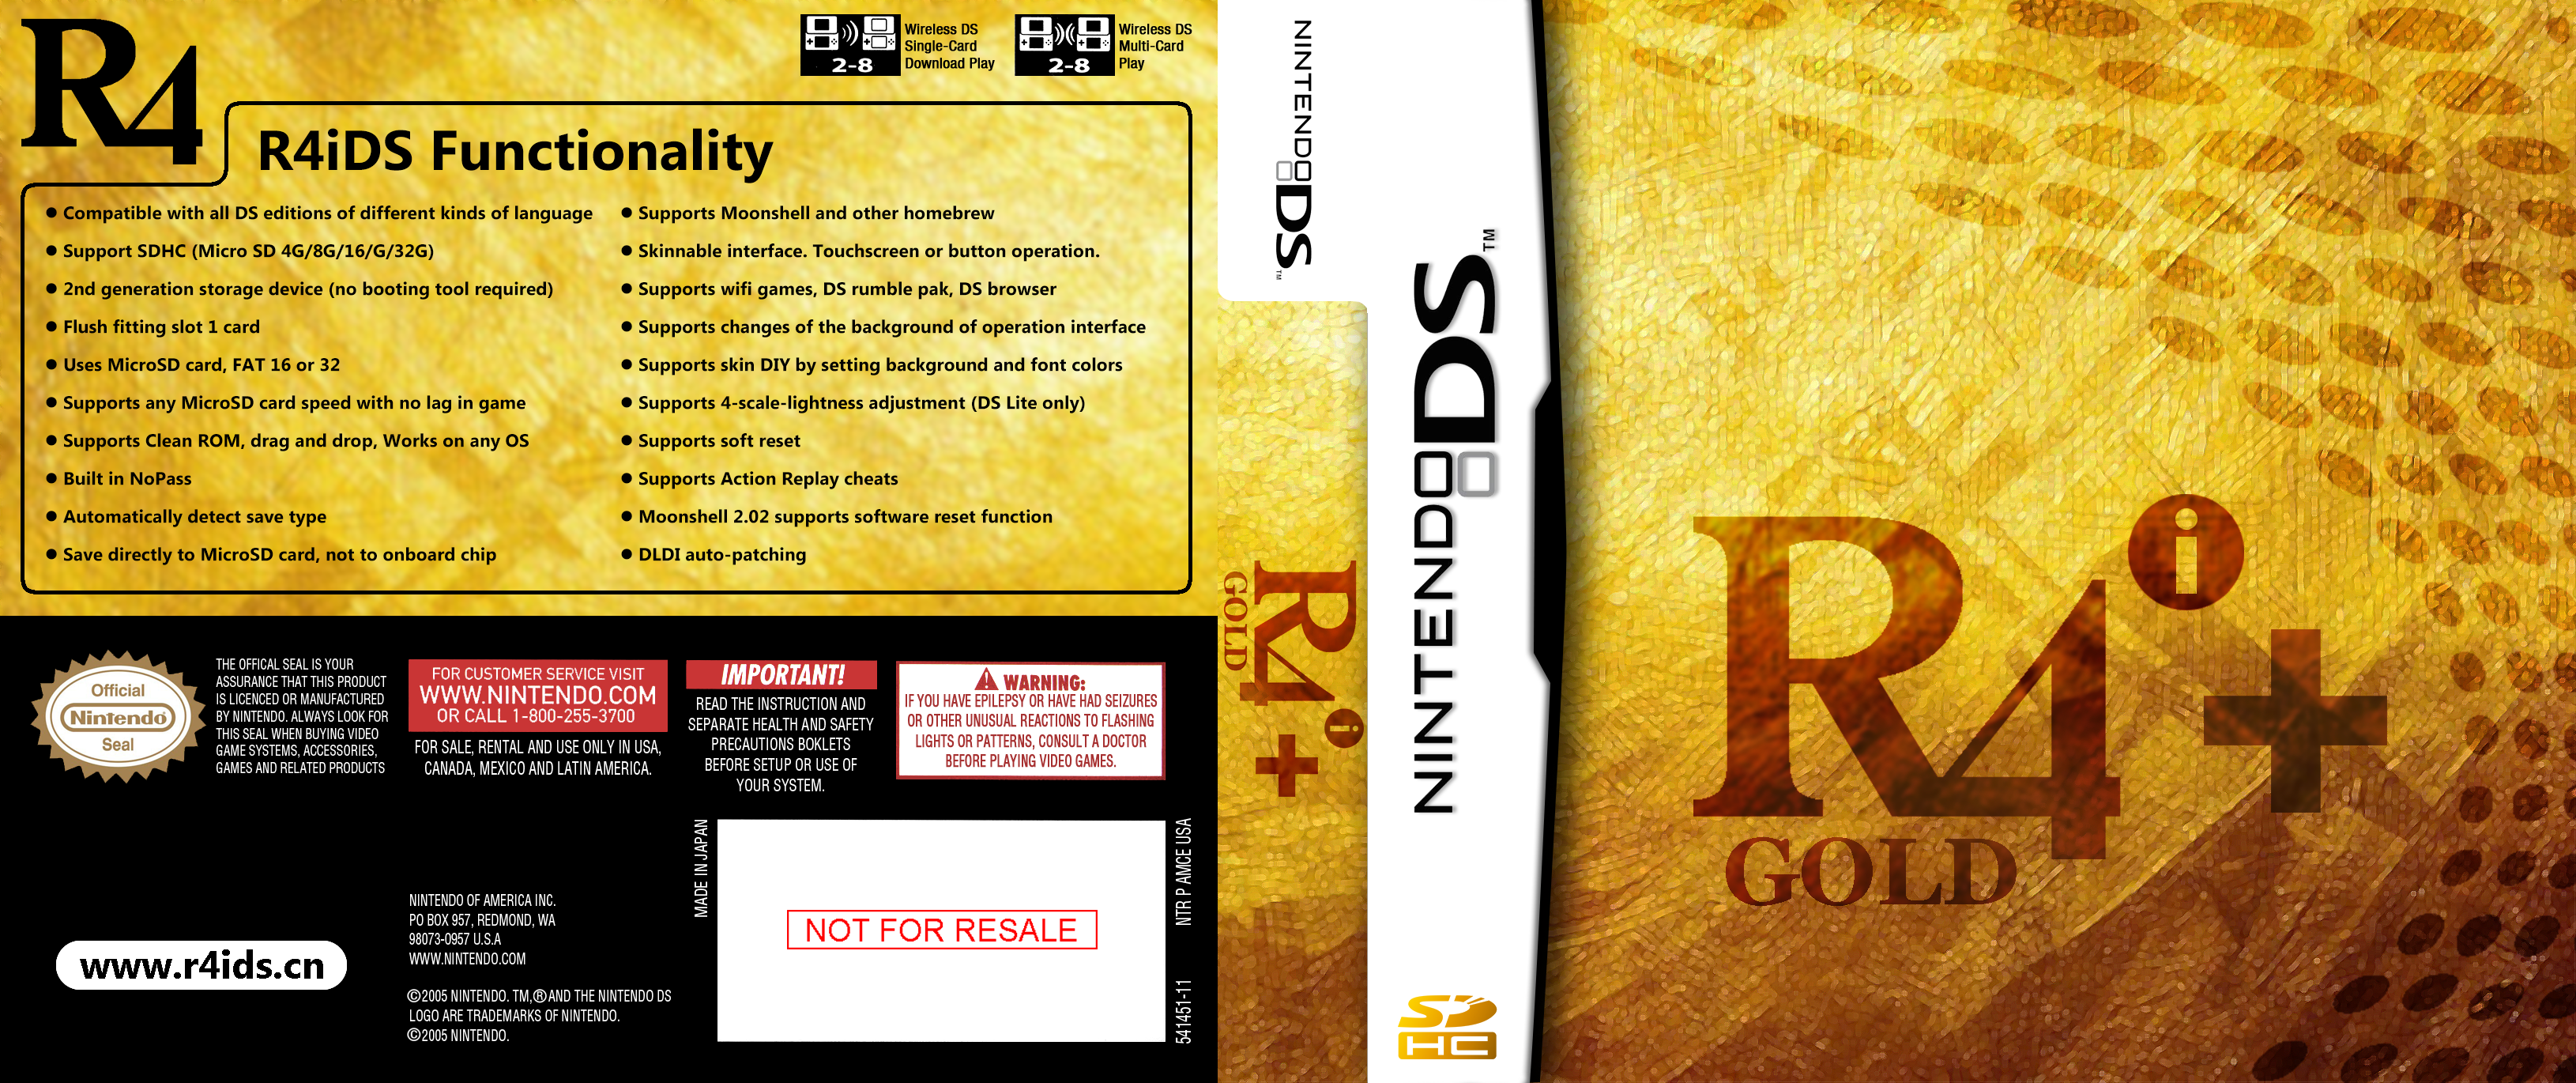 R4i Gold 3DS Plus box cover